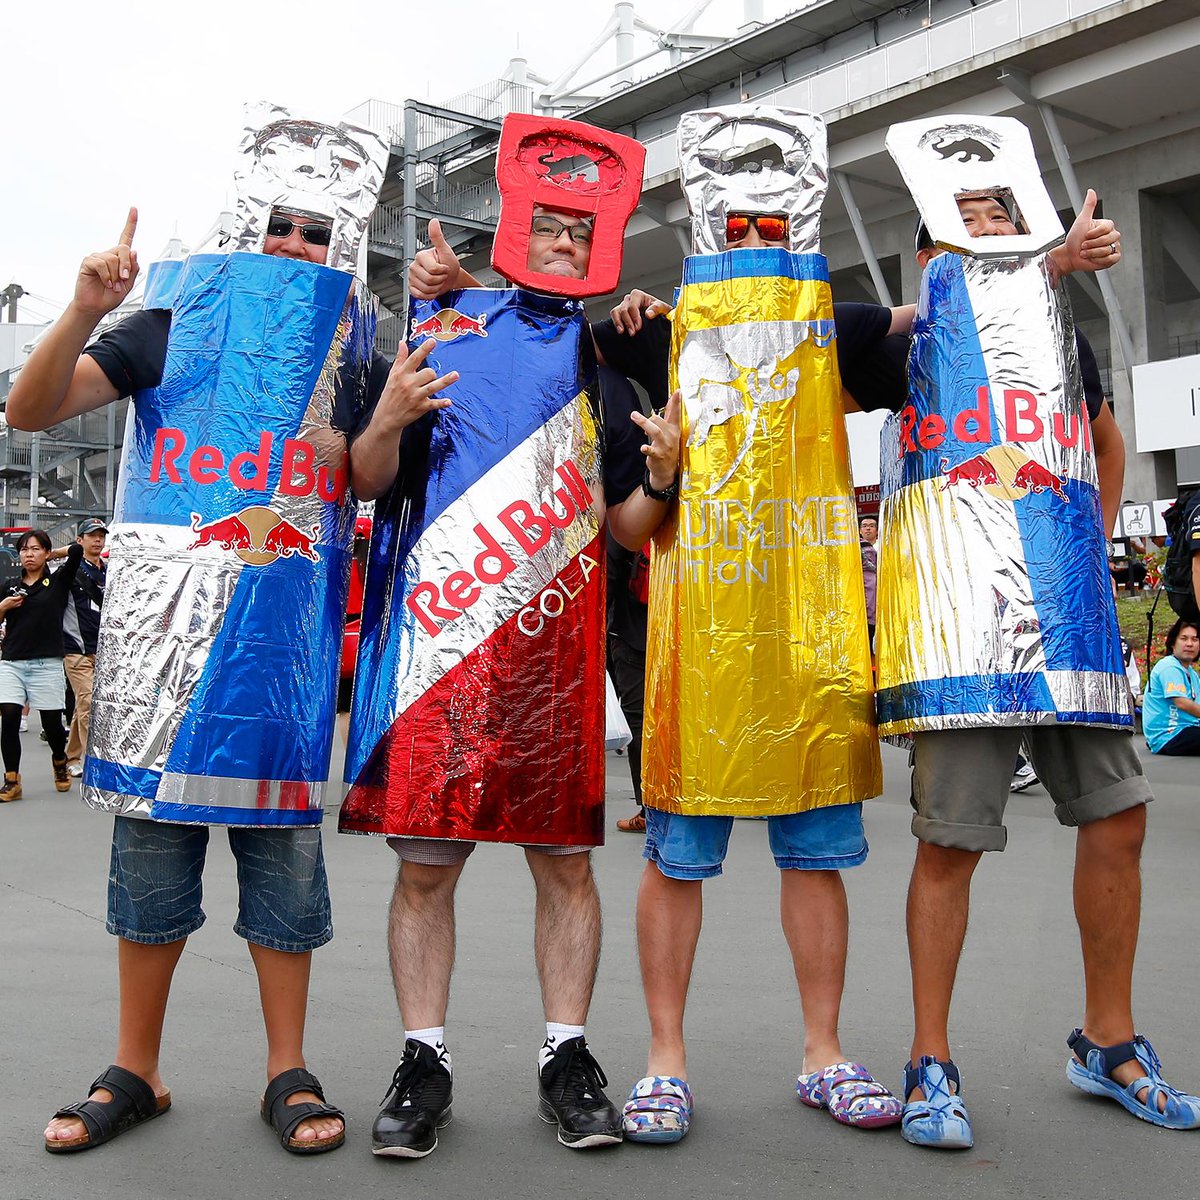 Oracle Bull Racing on Twitter: "From @RedBull Can Fans to a praying mantis. Fans at the #JapaneseGP like no other: http://t.co/Se8hr9VISA #F1 http://t.co/YxSFdaAy7F" / Twitter